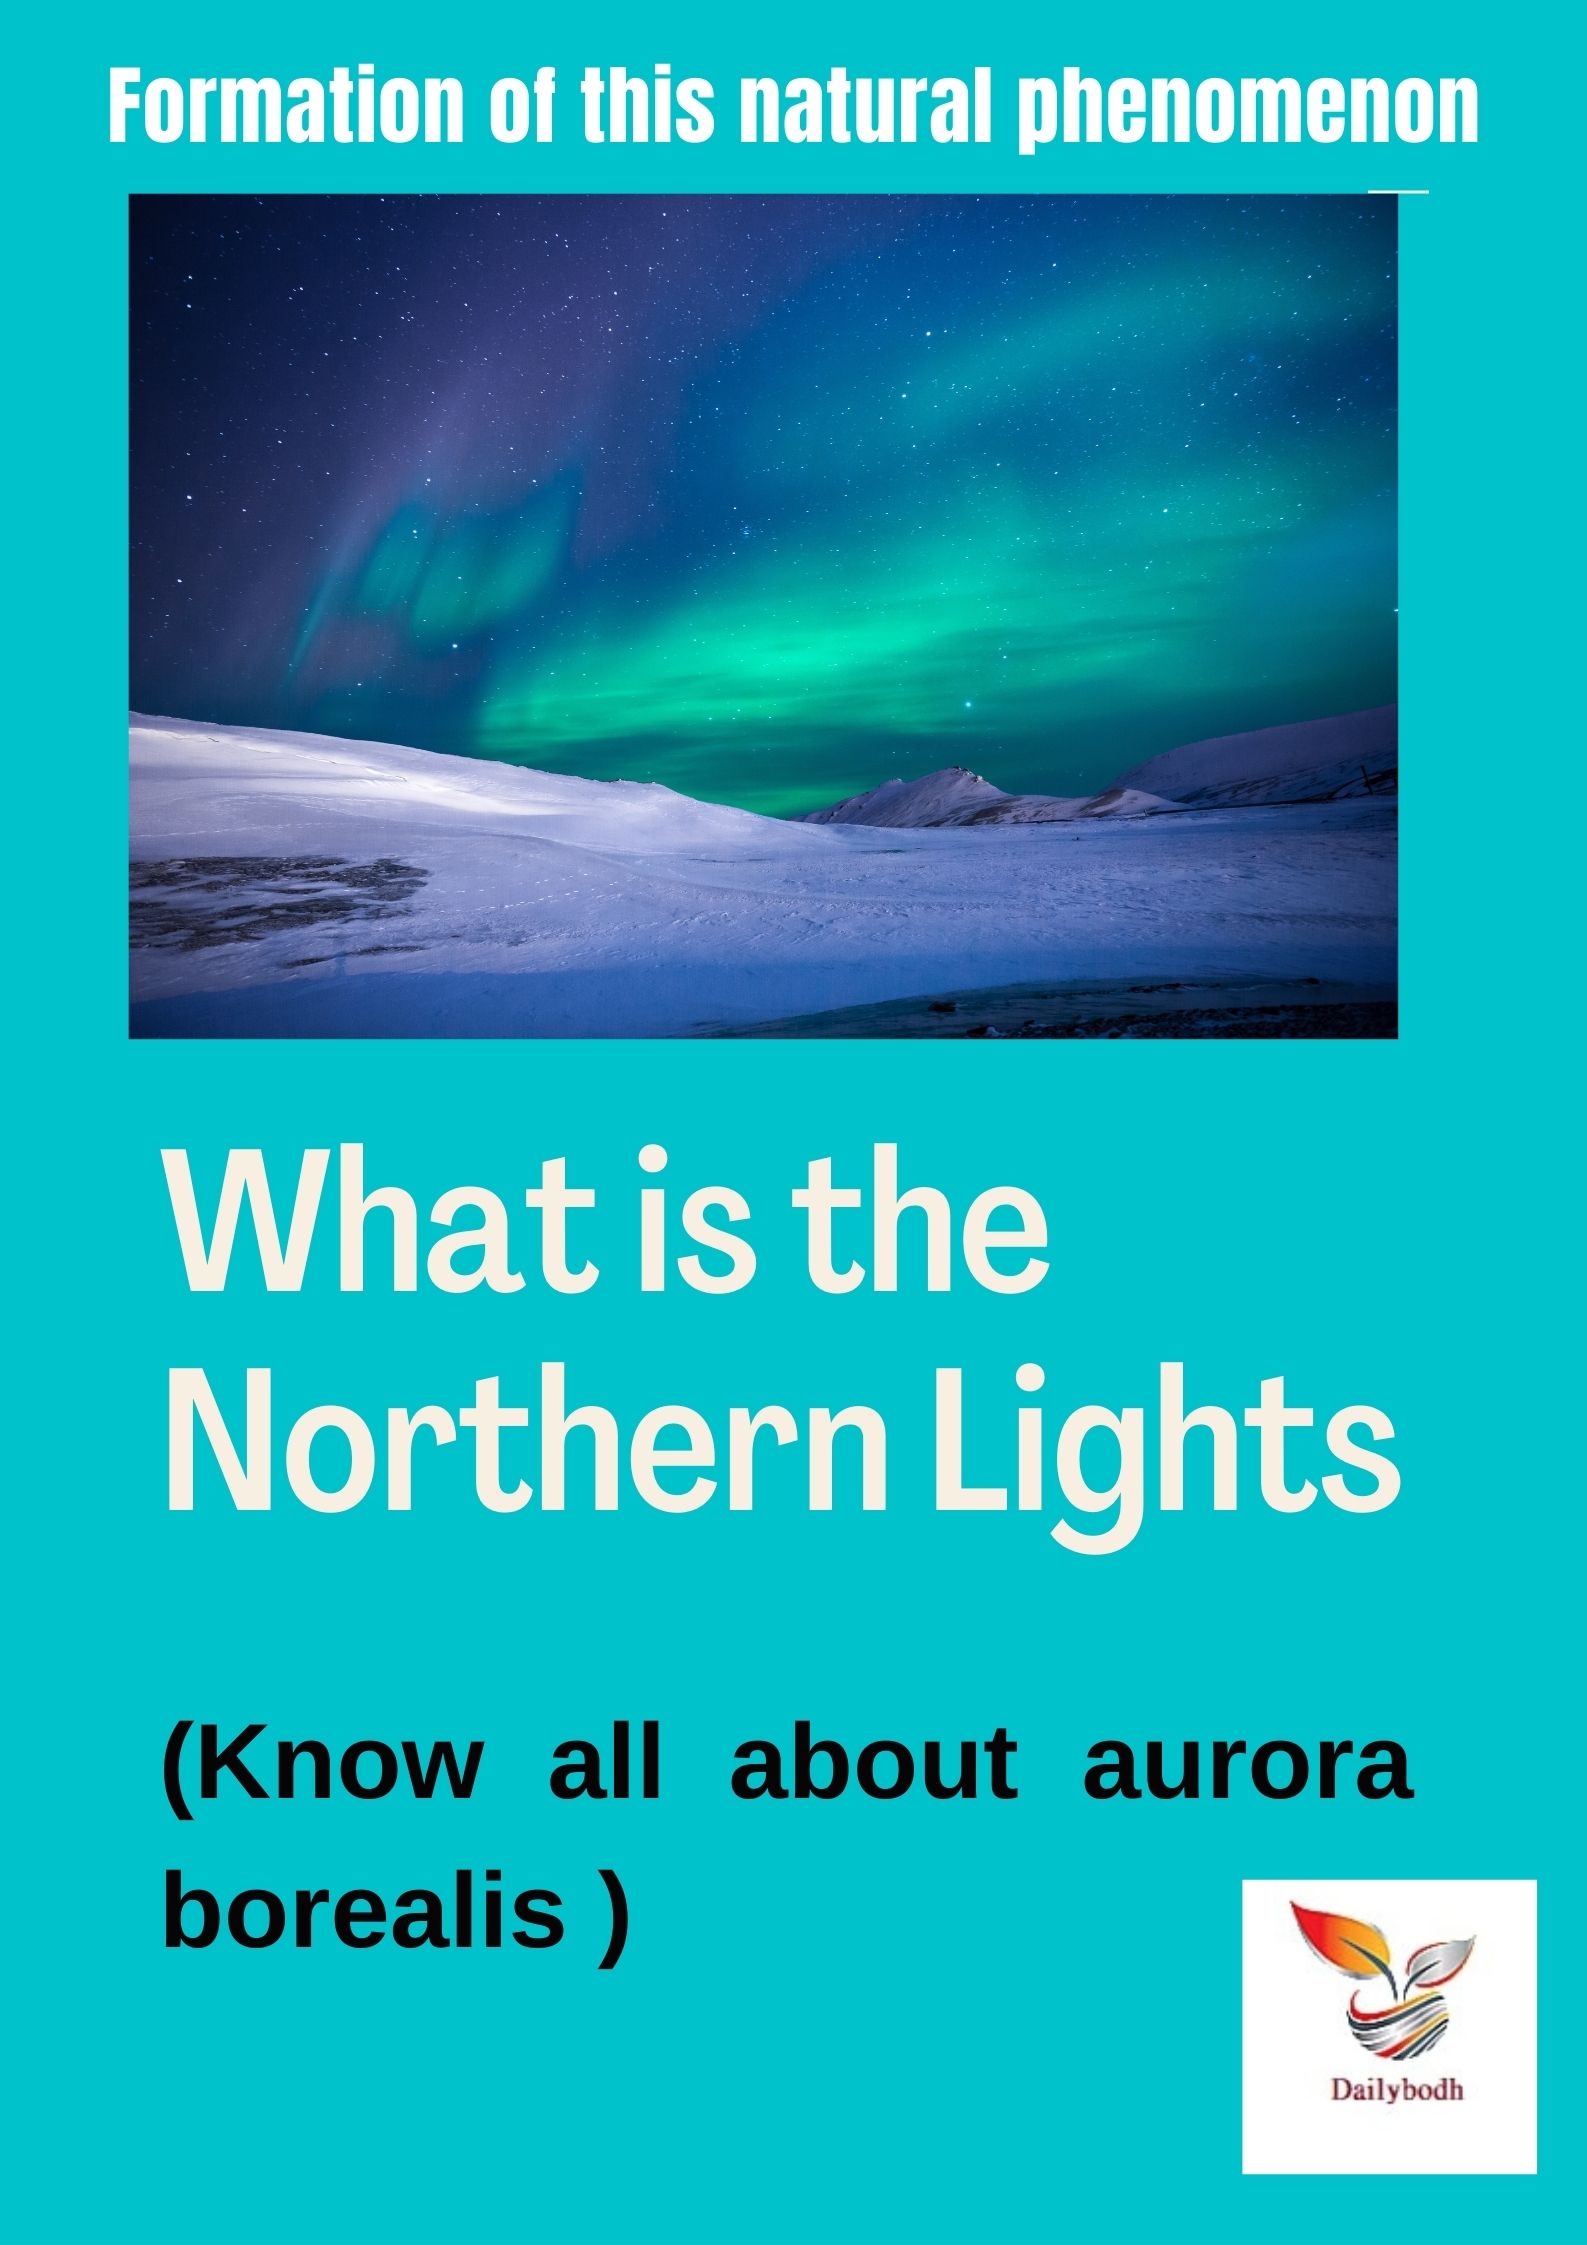 Formation of this natural phenomenon (What is the Northern Lights)